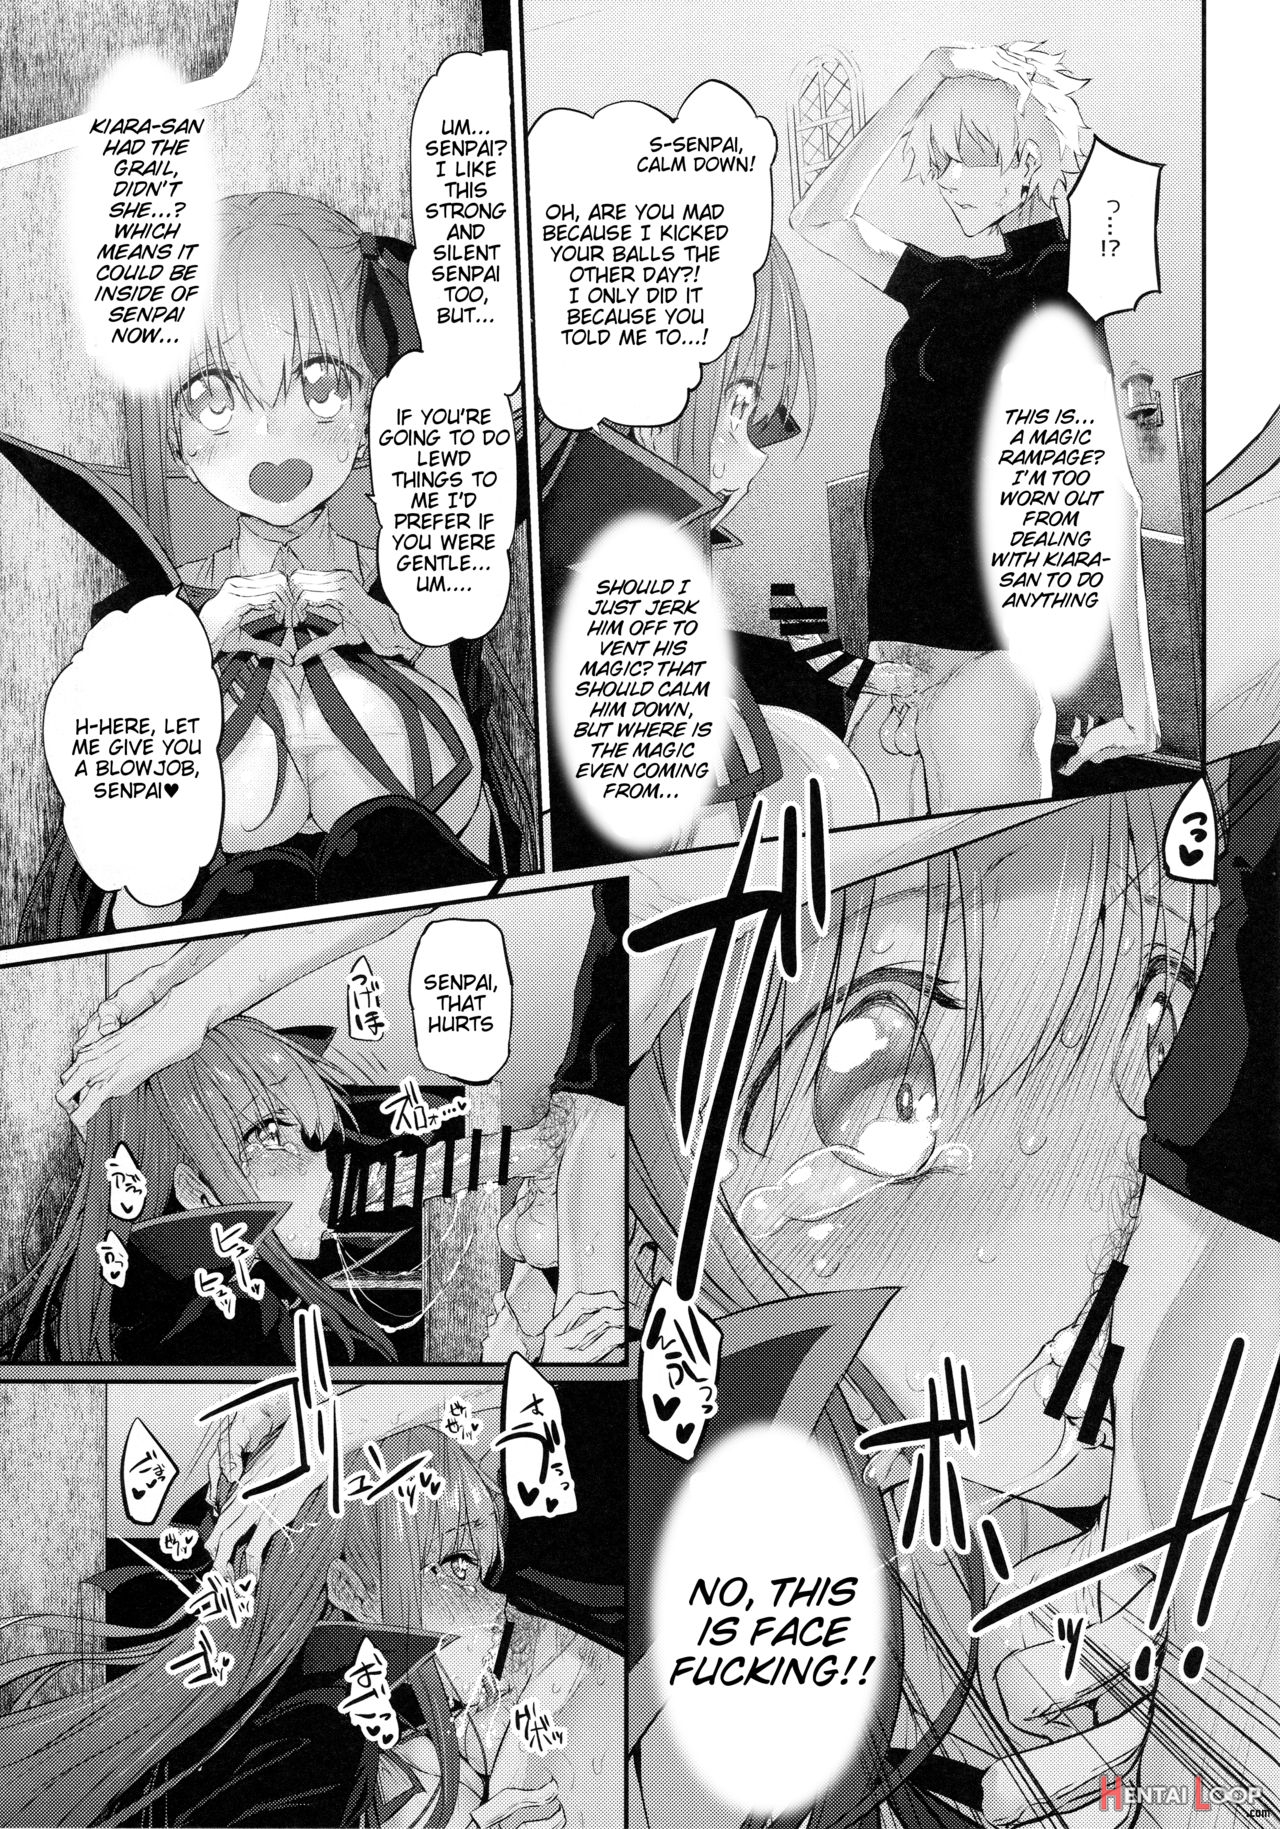 Marked Girls Vol. 15 page 15